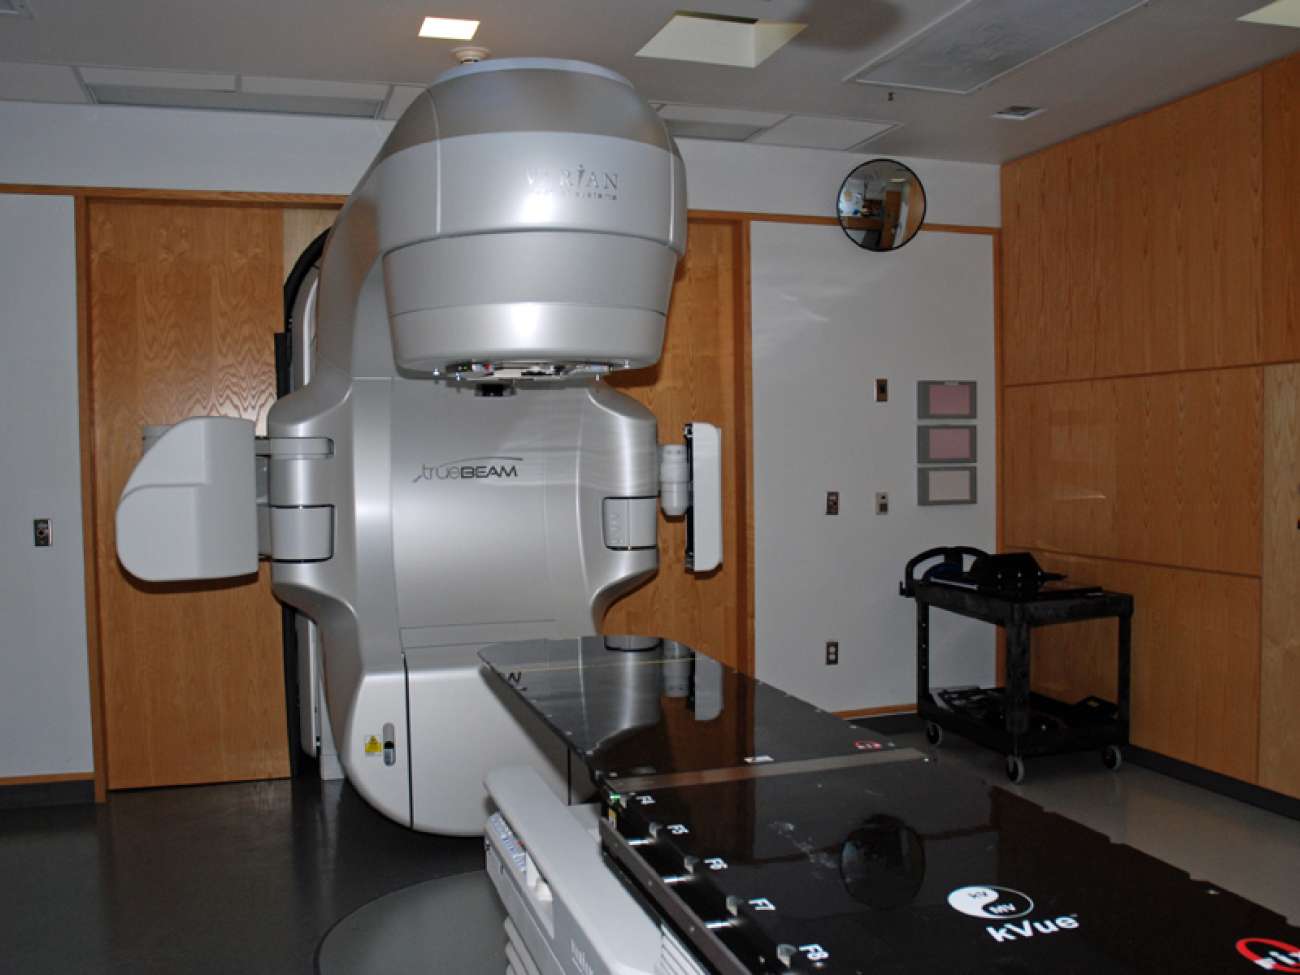 Another view of new linear accelerator, which will provide capacity to treat another 400 cancer patients a year.